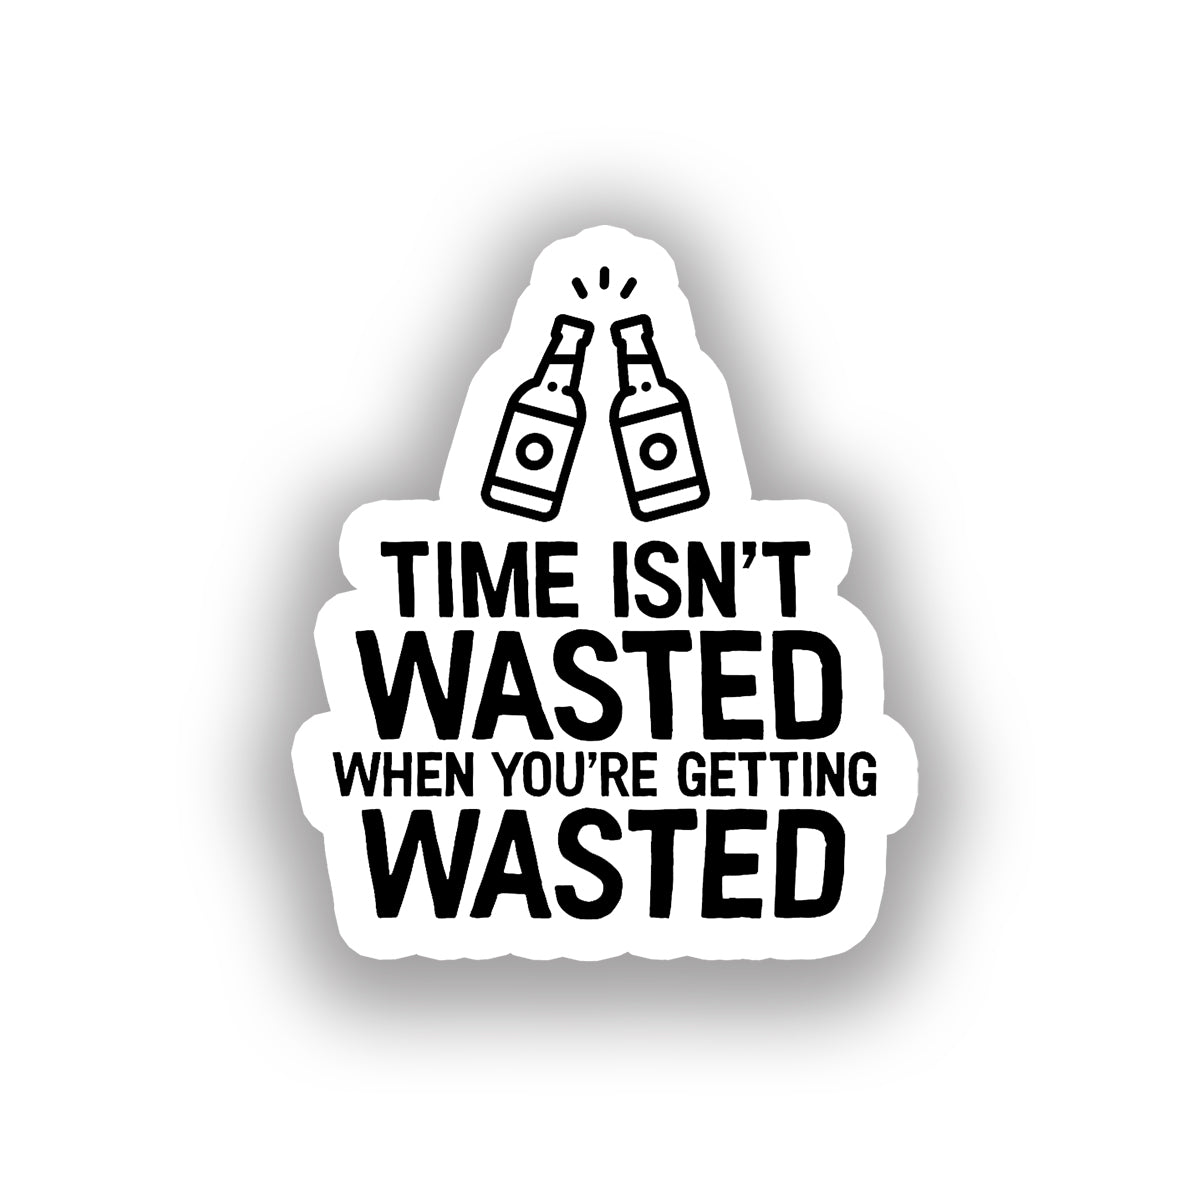 Time isn't wasted when you're getting wasted